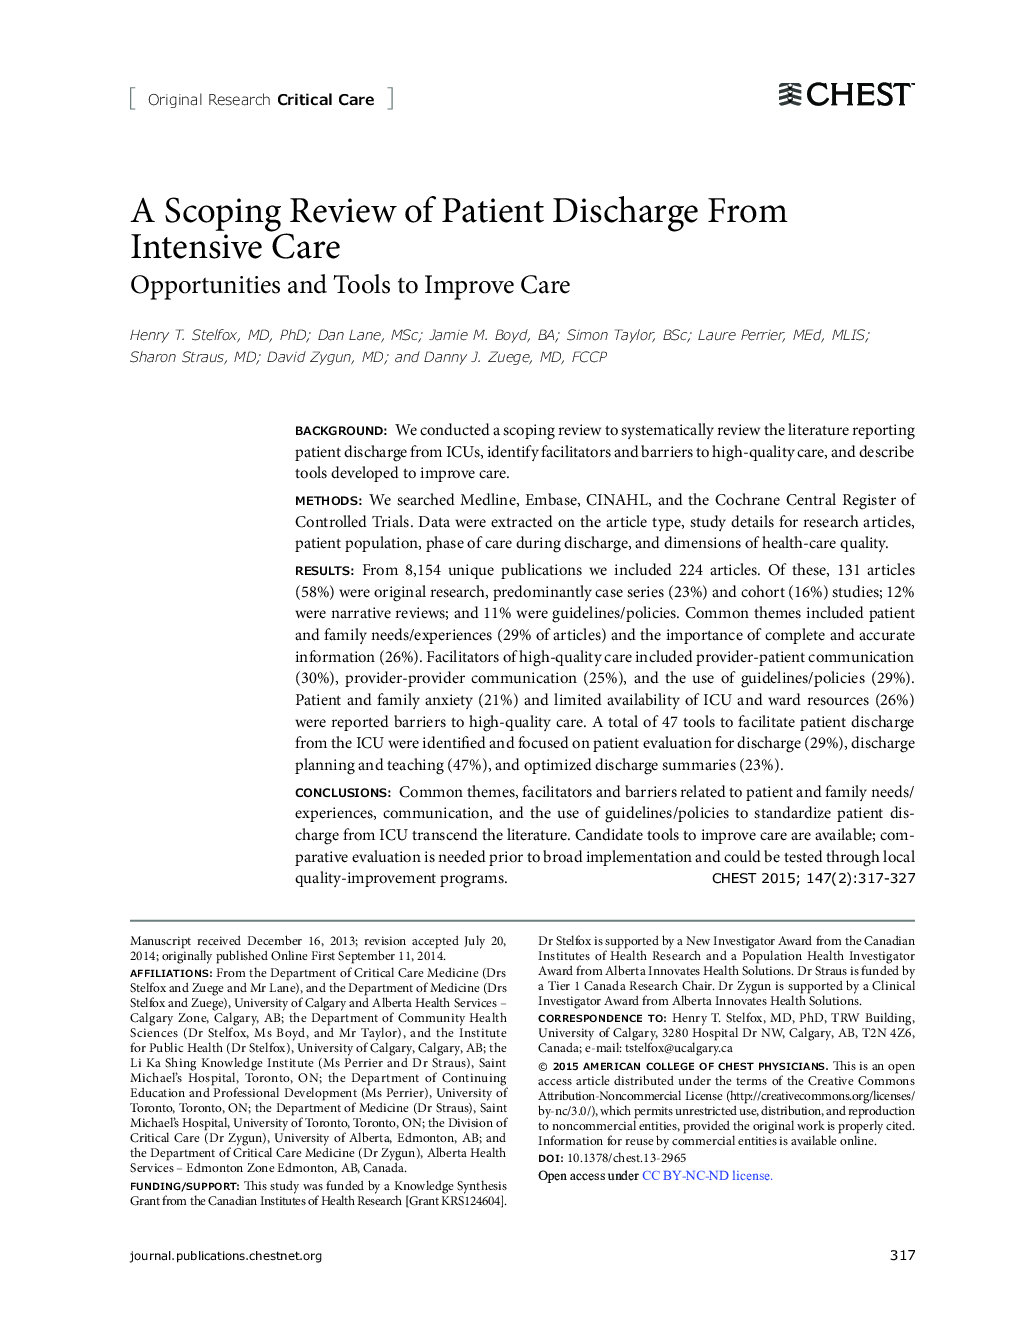 A Scoping Review of Patient Discharge From Intensive Care: Opportunities and Tools to Improve Care